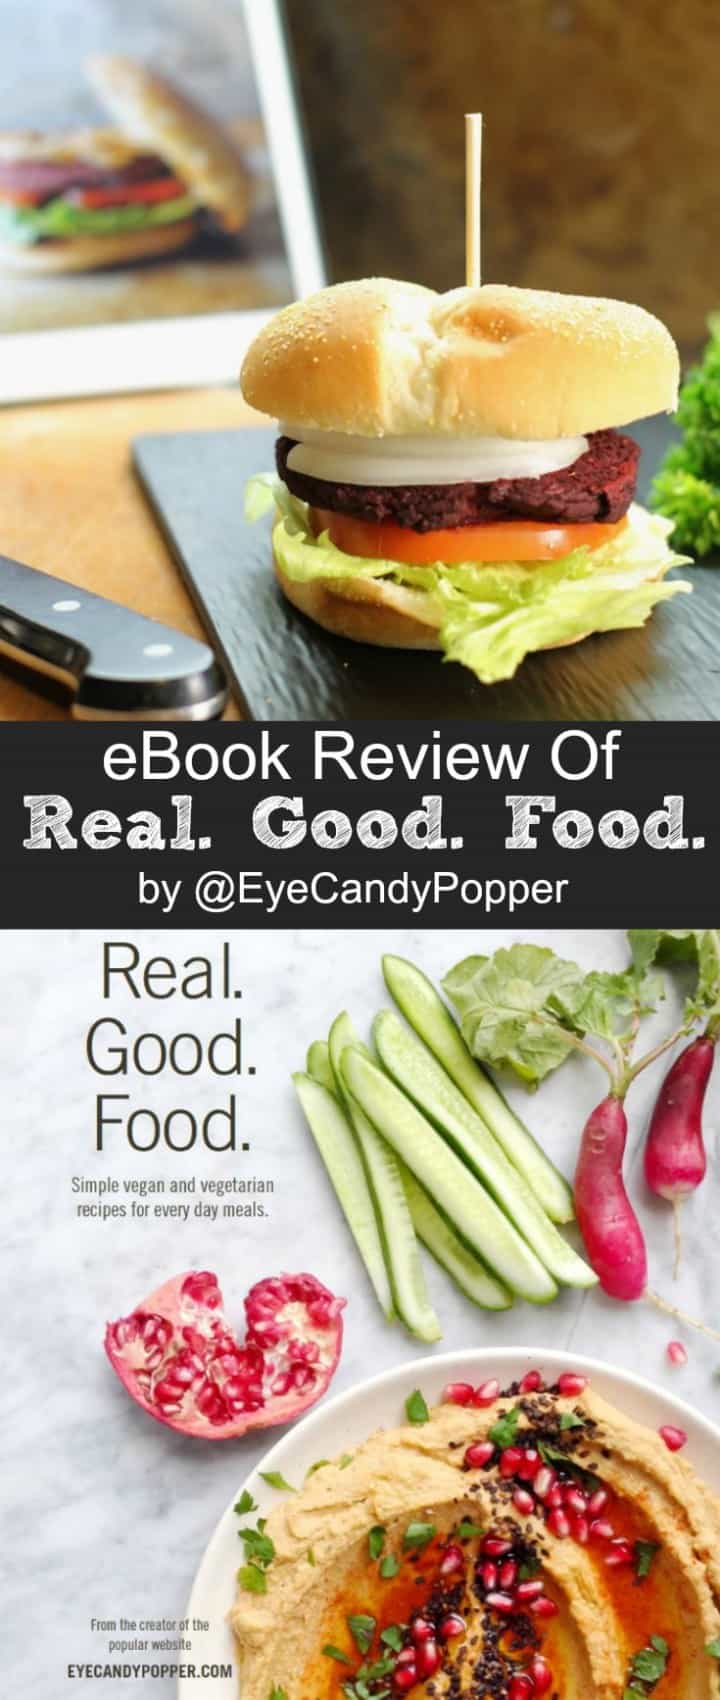 Learn how to start eating healthy, nutritious foods with Gabrielle Gottschalk's ecookbook 'Real. Good. Food.' . Packed with 40 recipes and beautiful photos to help you start eating better food at home! #healthyeating #organic#veganrecipes #vegetarian